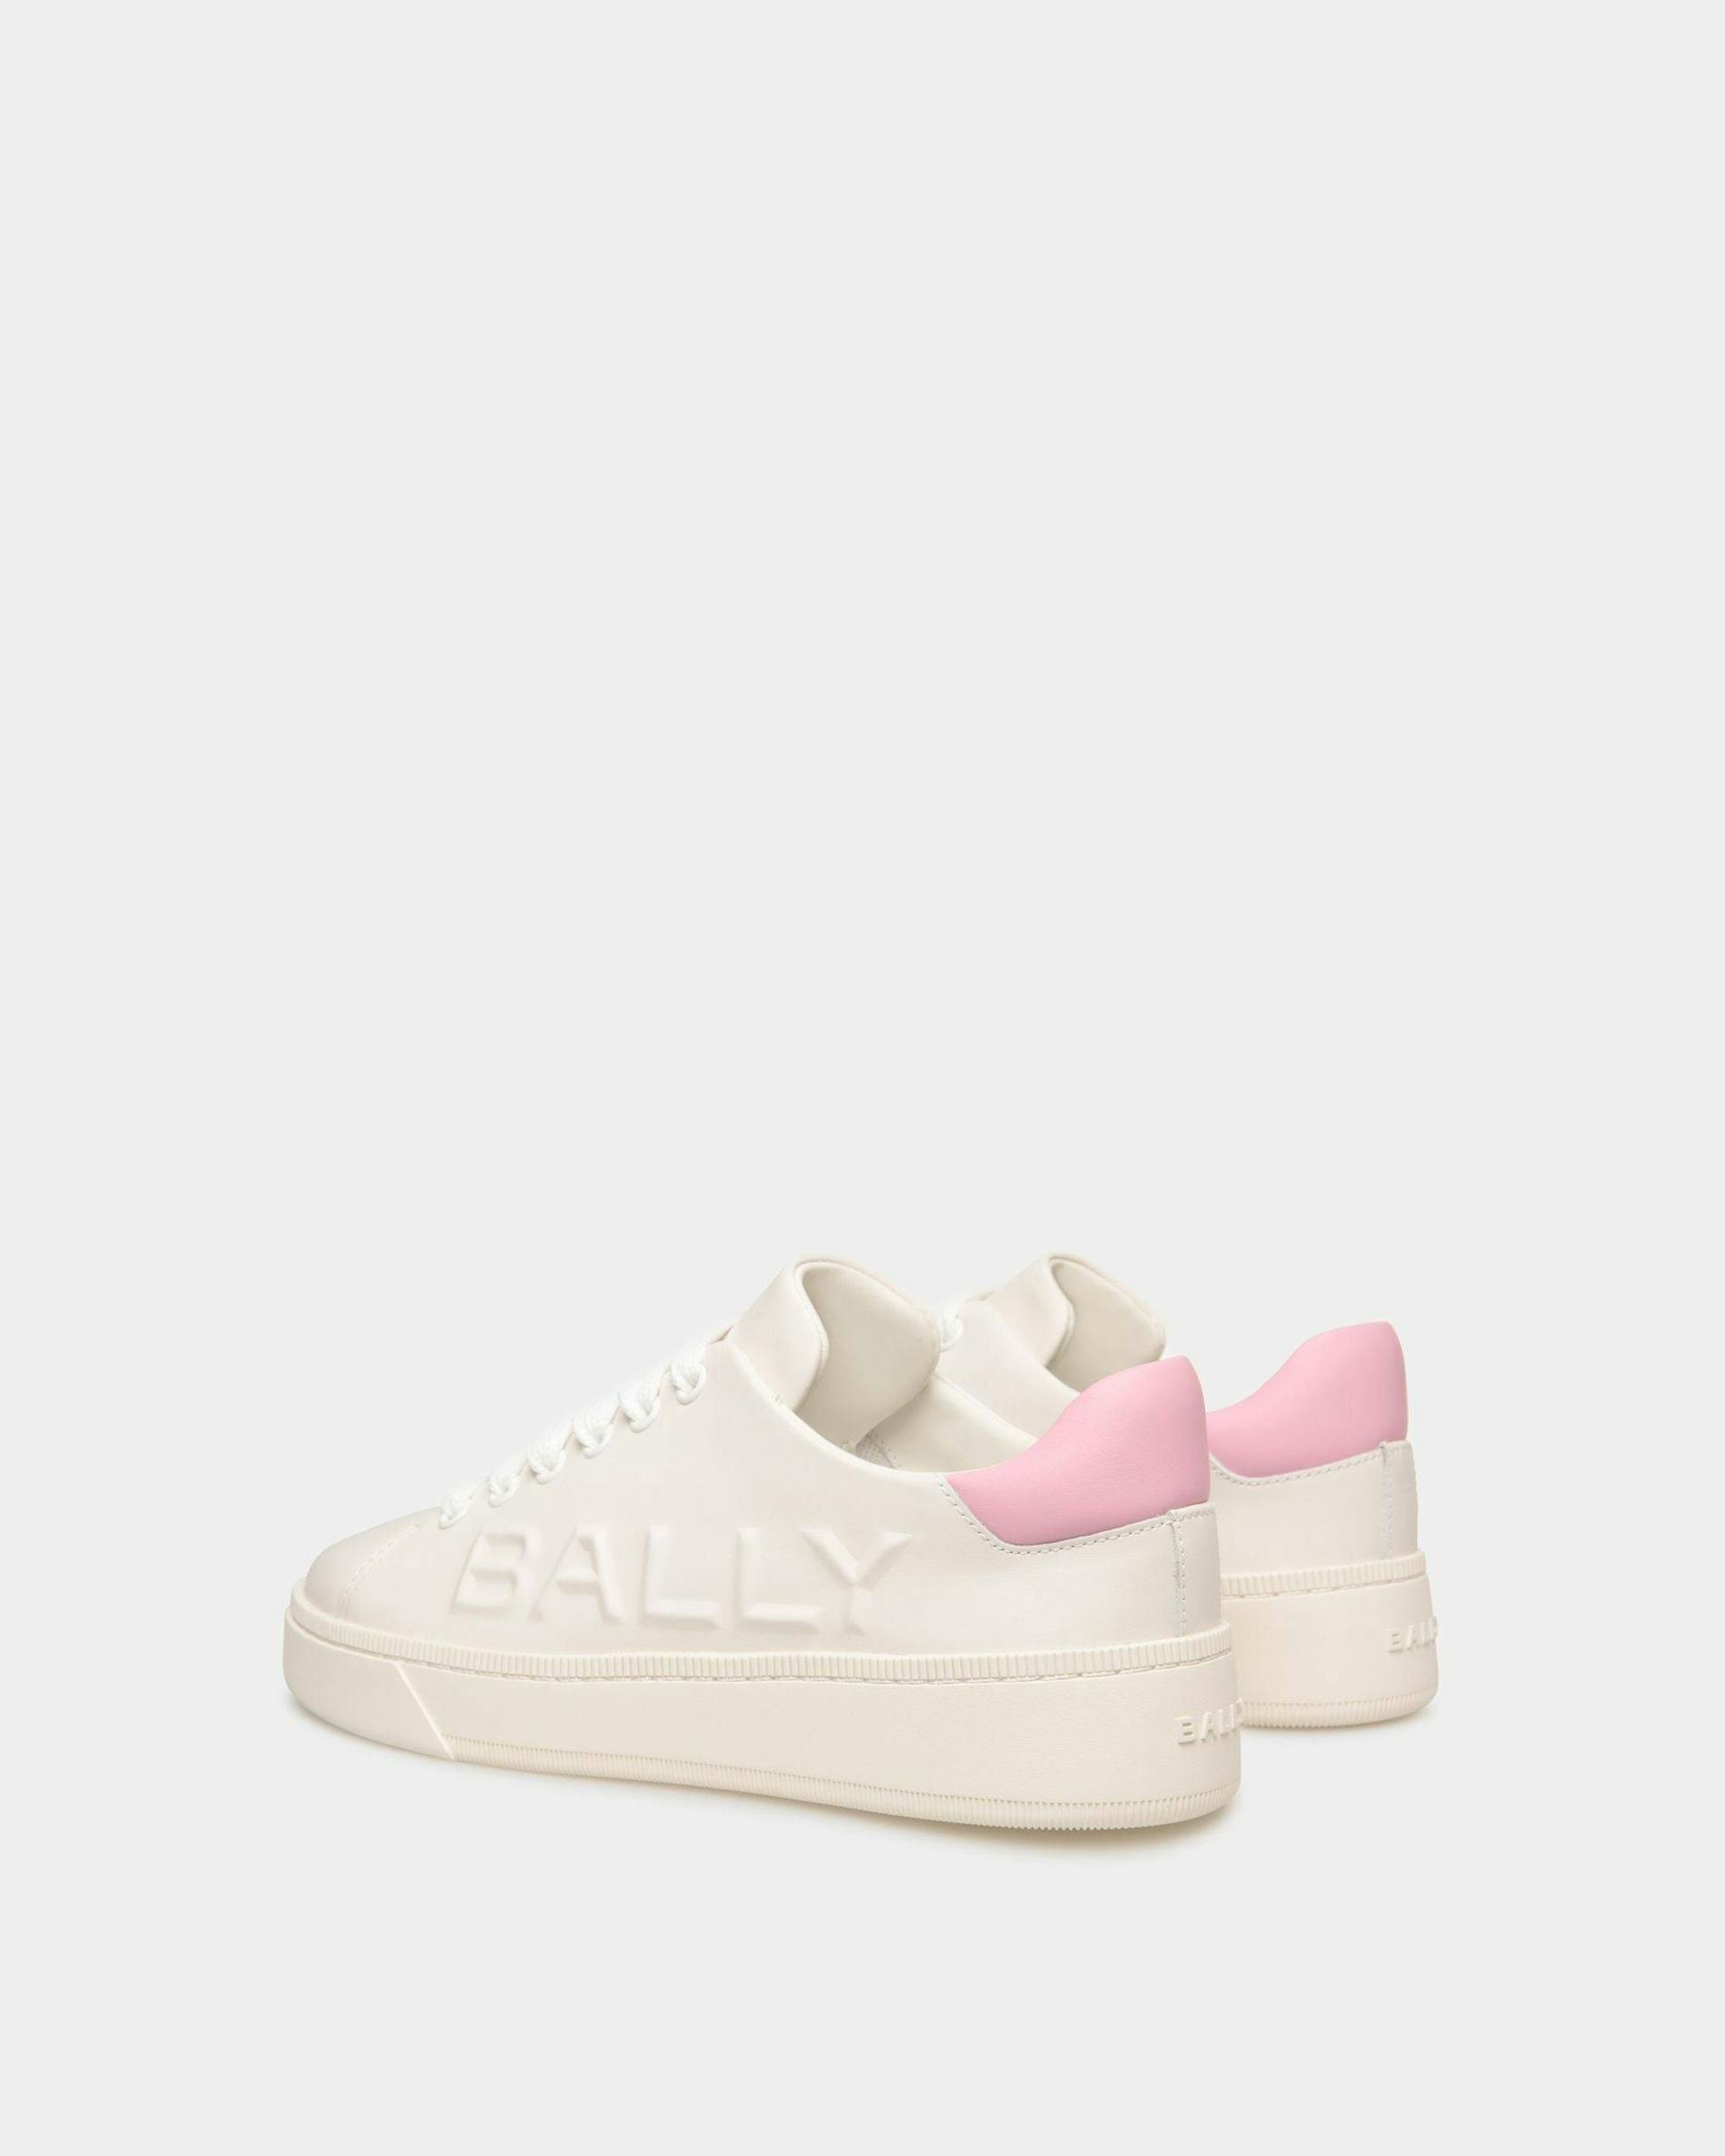 Women's Raise Sneaker In White And Pink Leather | Bally | Still Life 3/4 Back